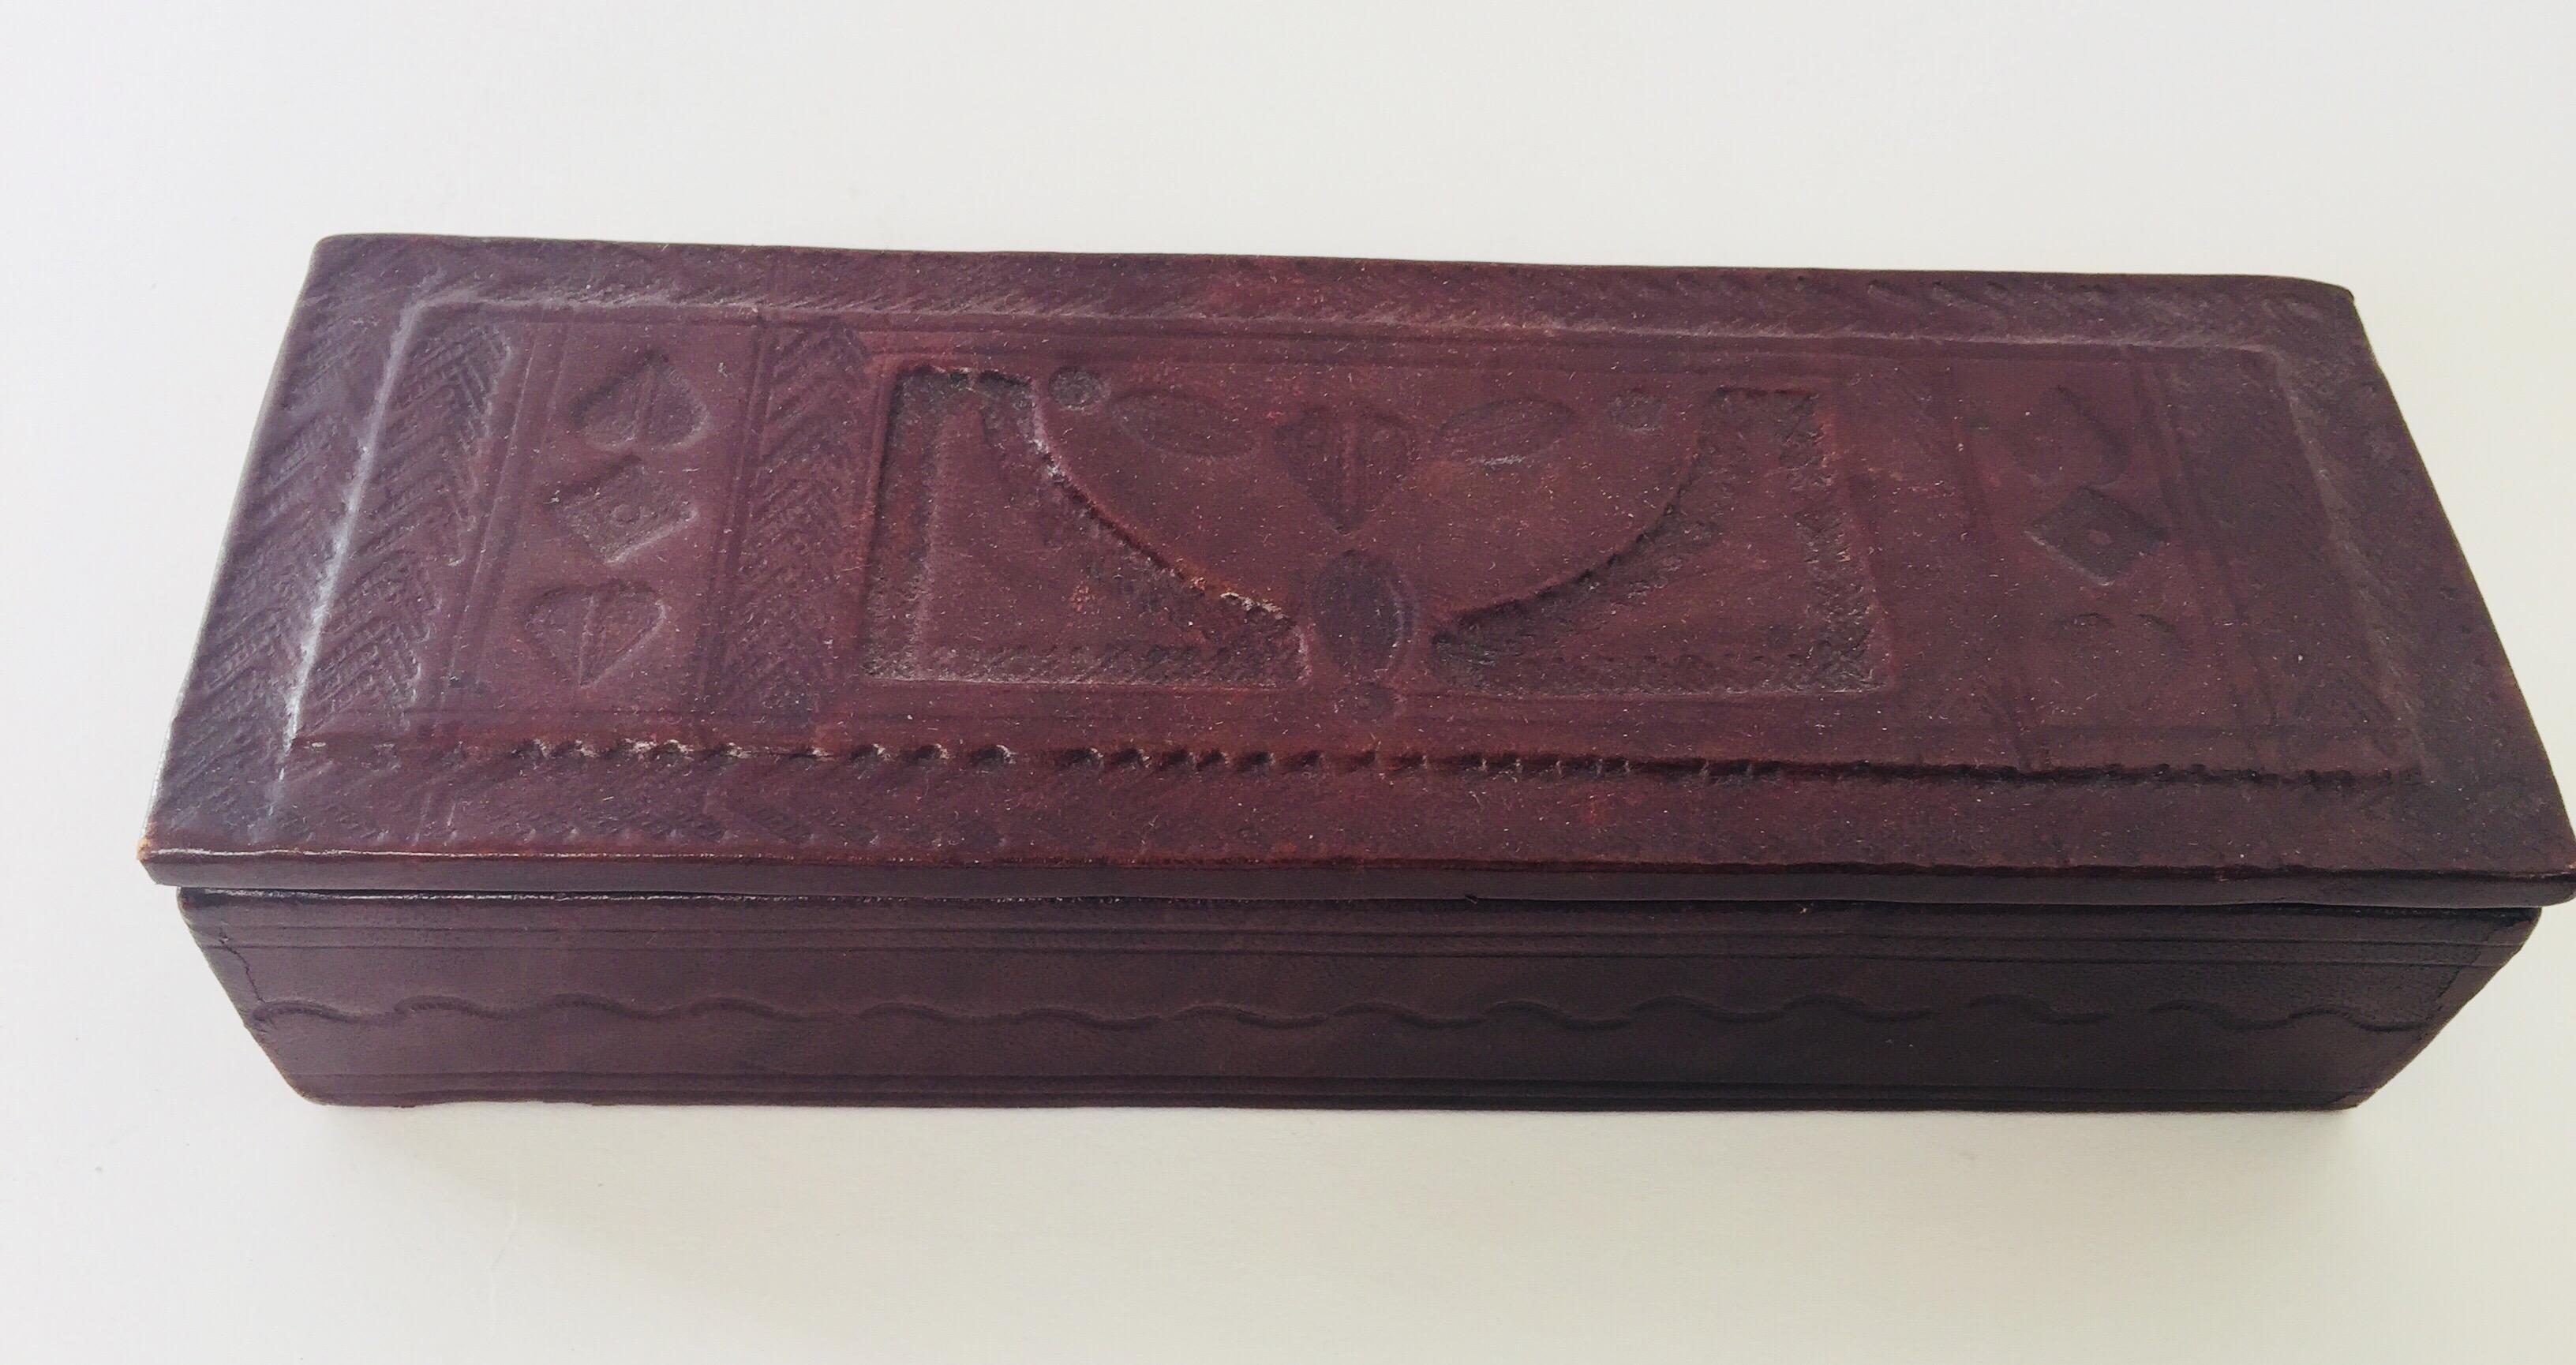 Hand tooled chocolate brown leather box from Africa.
Very fine workmanship with tribal traditional West African symbols on dark brown leather.
Tuareg style probably Mauritania.
Open to a leather lined interior.
Dimensions: 7.5